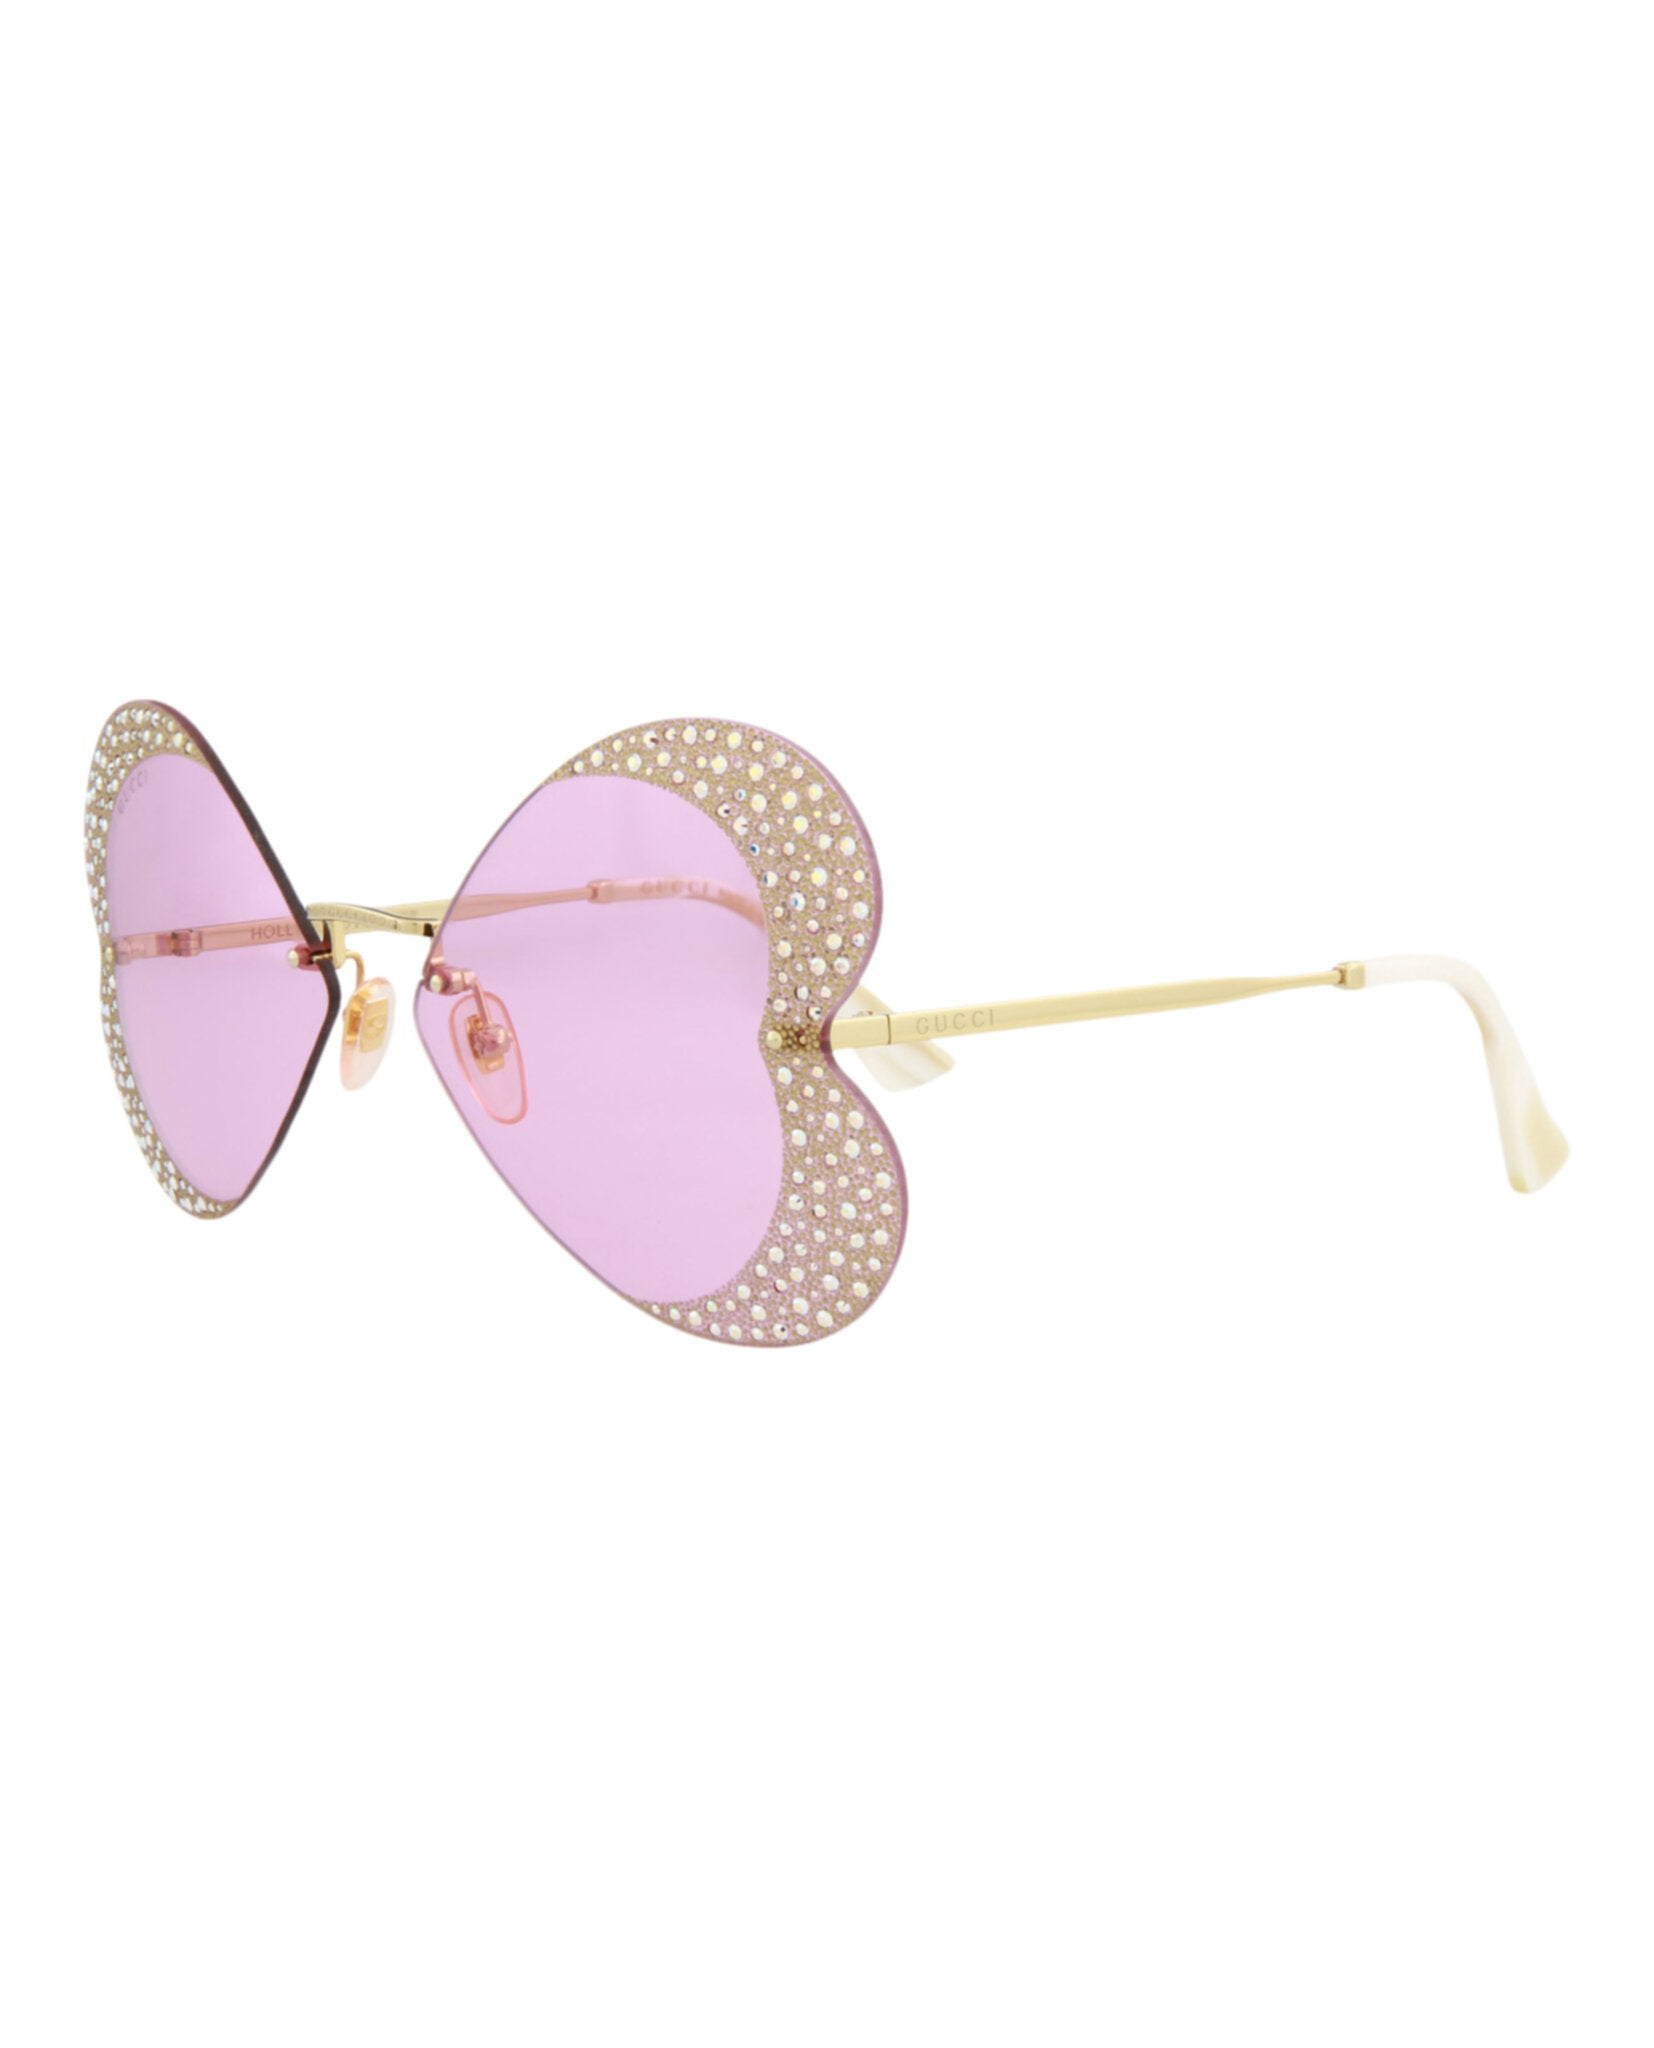 title:Gucci Women's GG0897S-30010507001 Special Edition Sunglasses;color:Gold Gold Pink